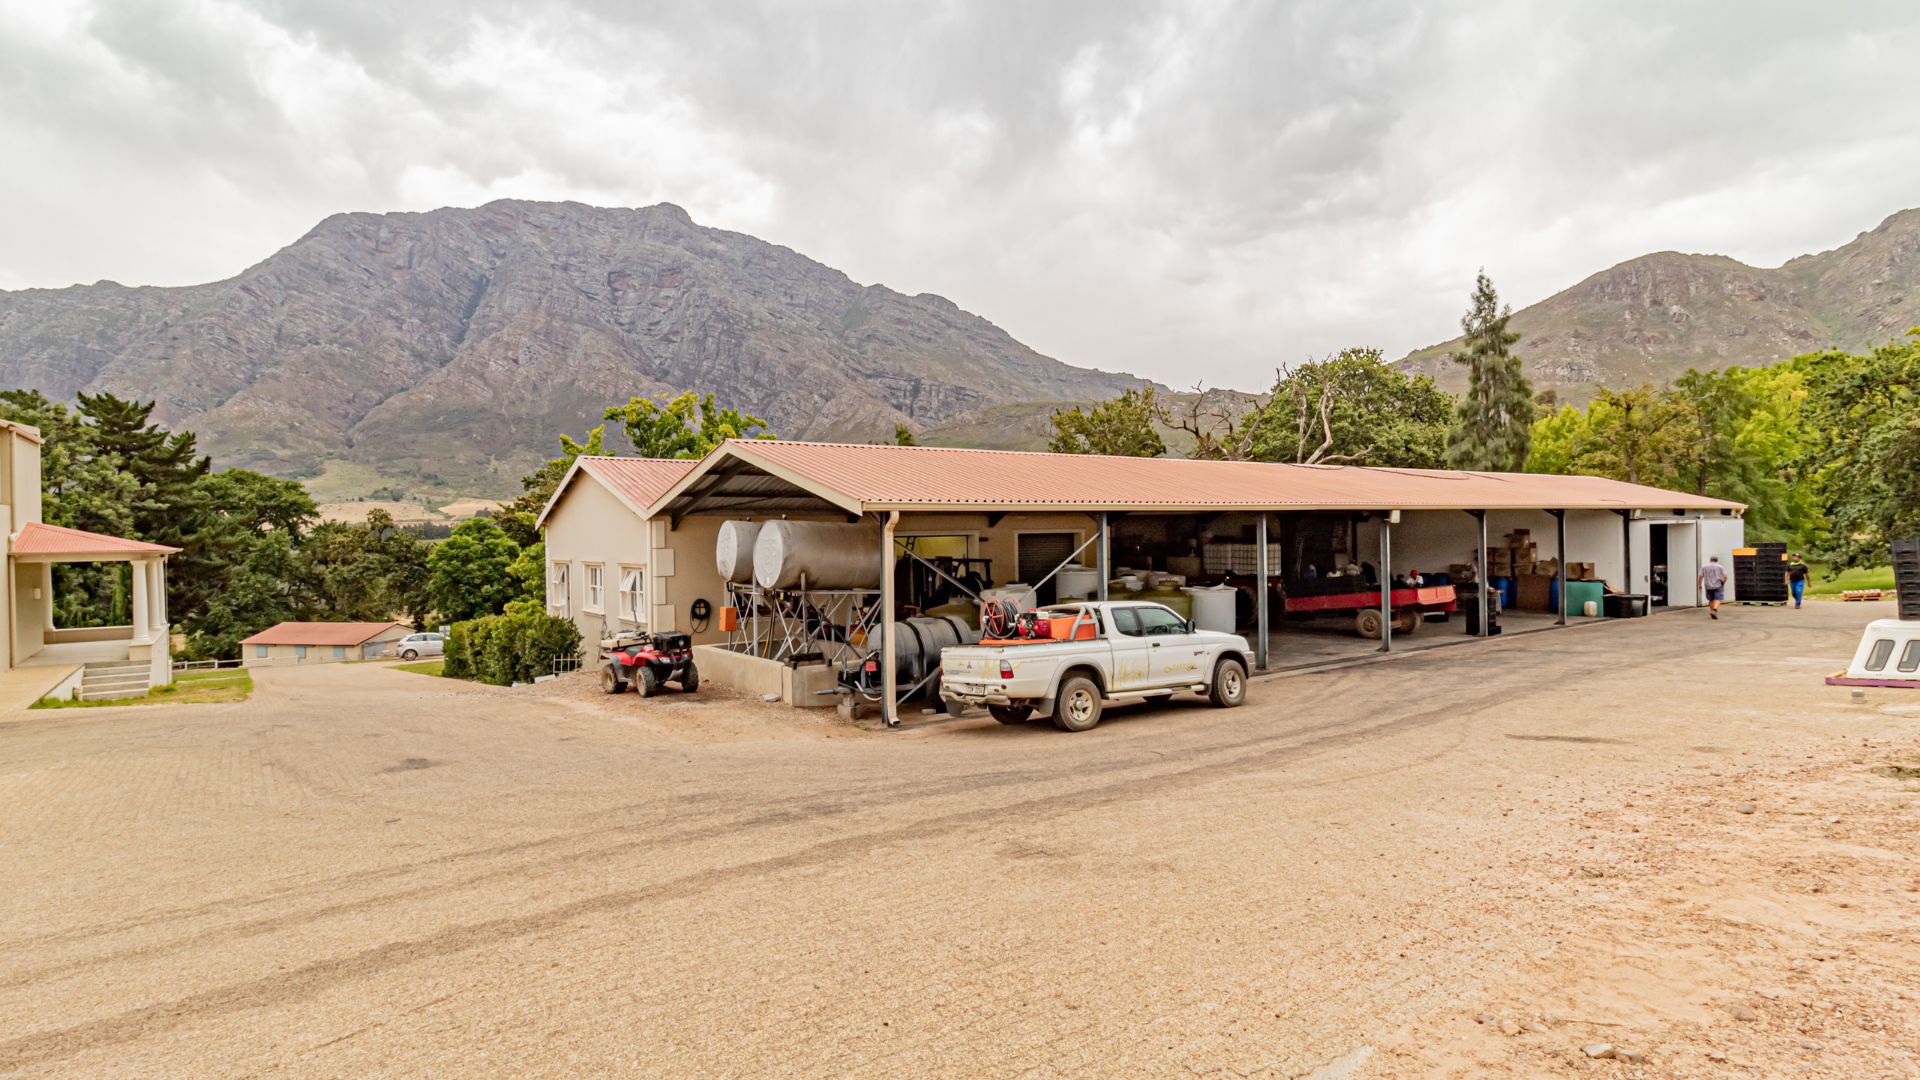 Land in Tulbagh - Image-066.jpg